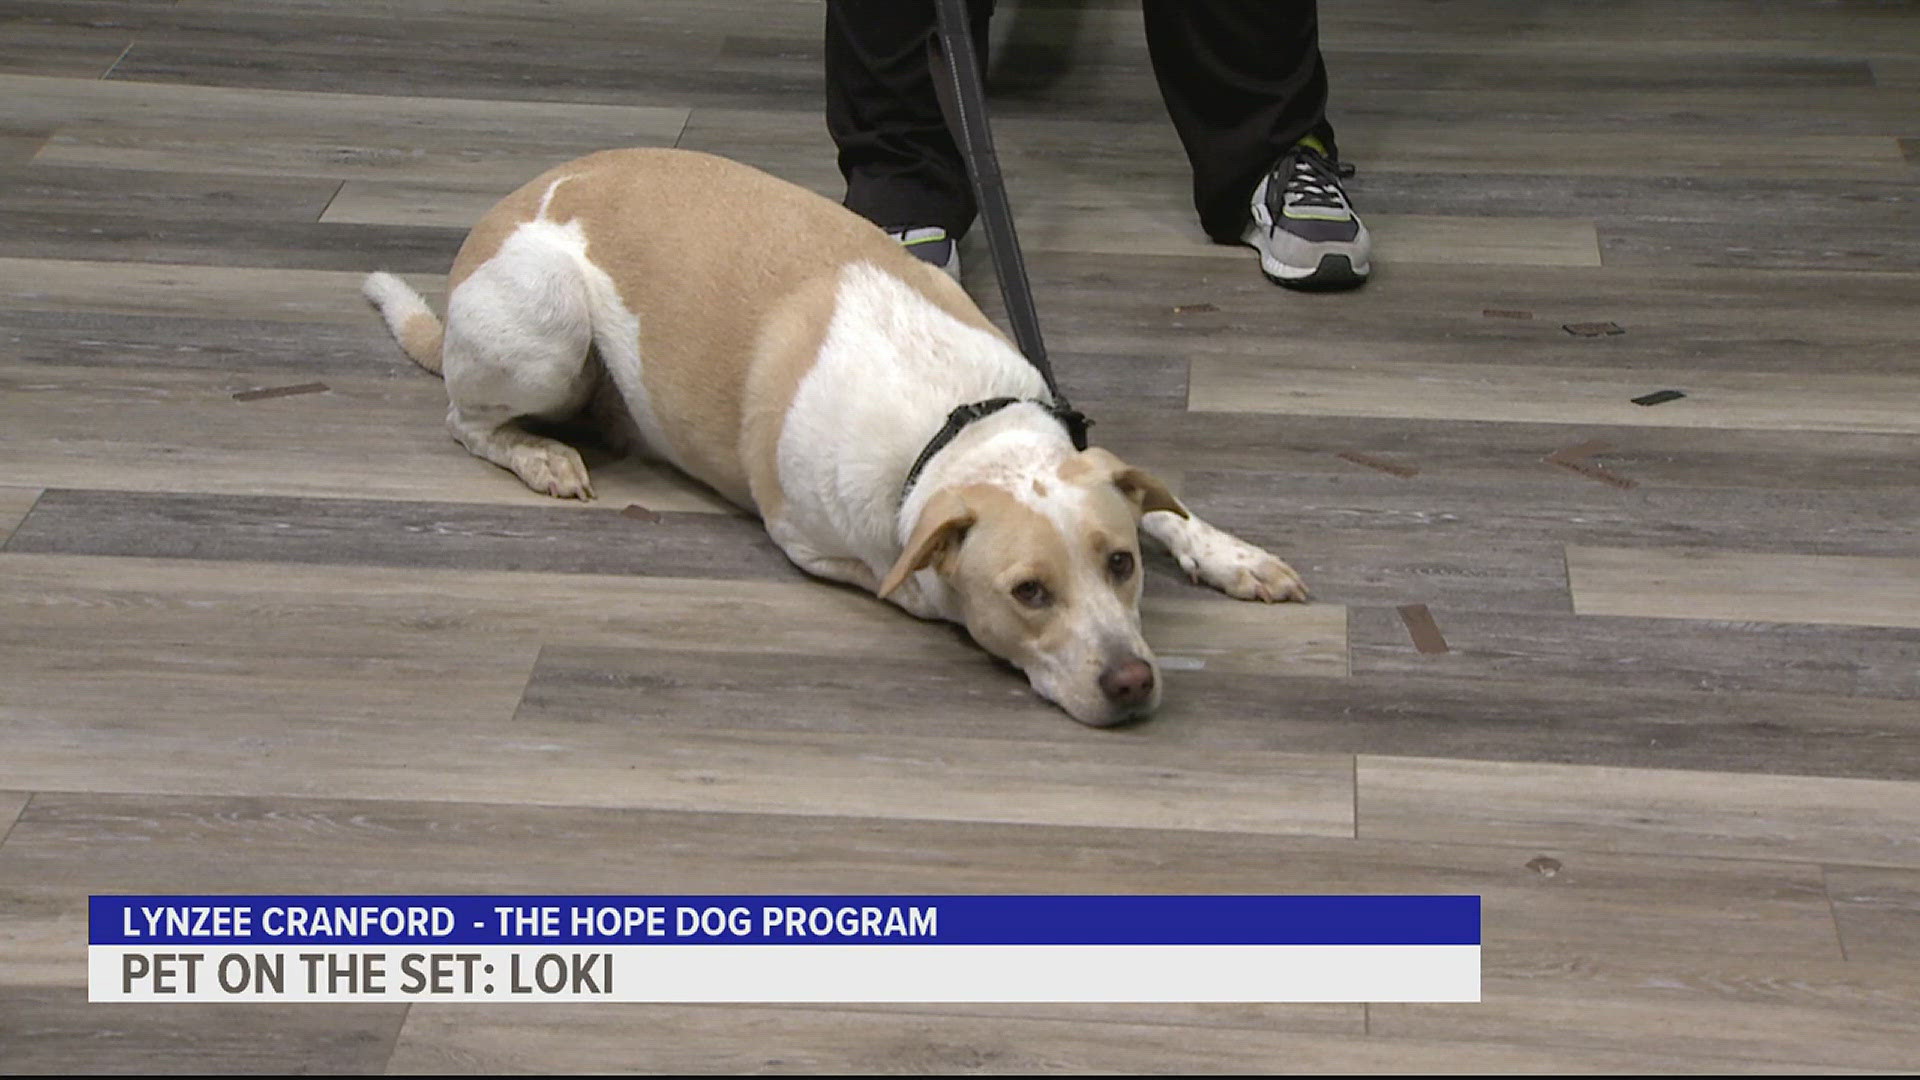 Loki is available for adoption from Animal Rescue Inc. and has been working on his training with the HOPE program.